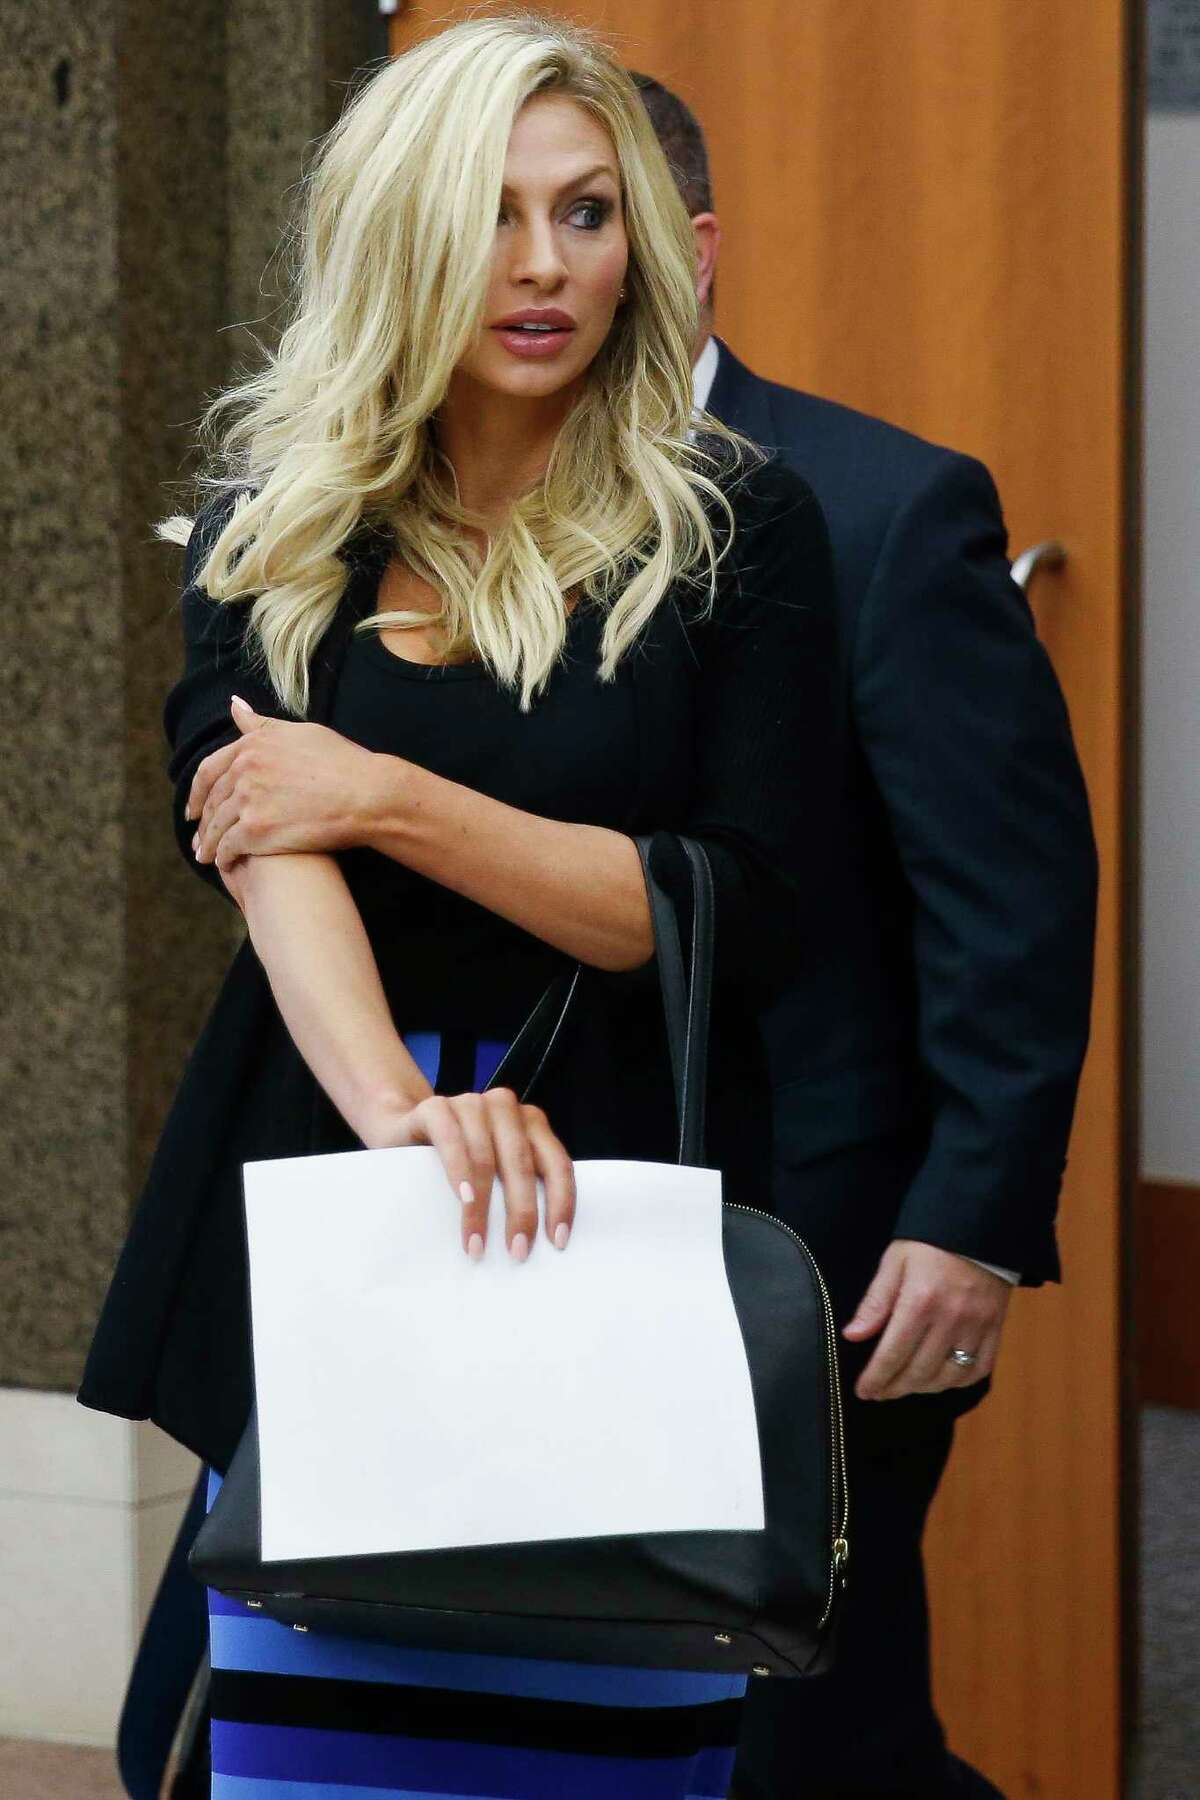 Lindy Lou Layman walks out of court Tuesday, Jan. 9, 2018 in Houston. Layman is accused of destroying at least $300,000 worth of sculptures and original paintings - including two original Andy Warhol works - at the River Oaks home of Houston trial lawyer Anthony Buzbee.